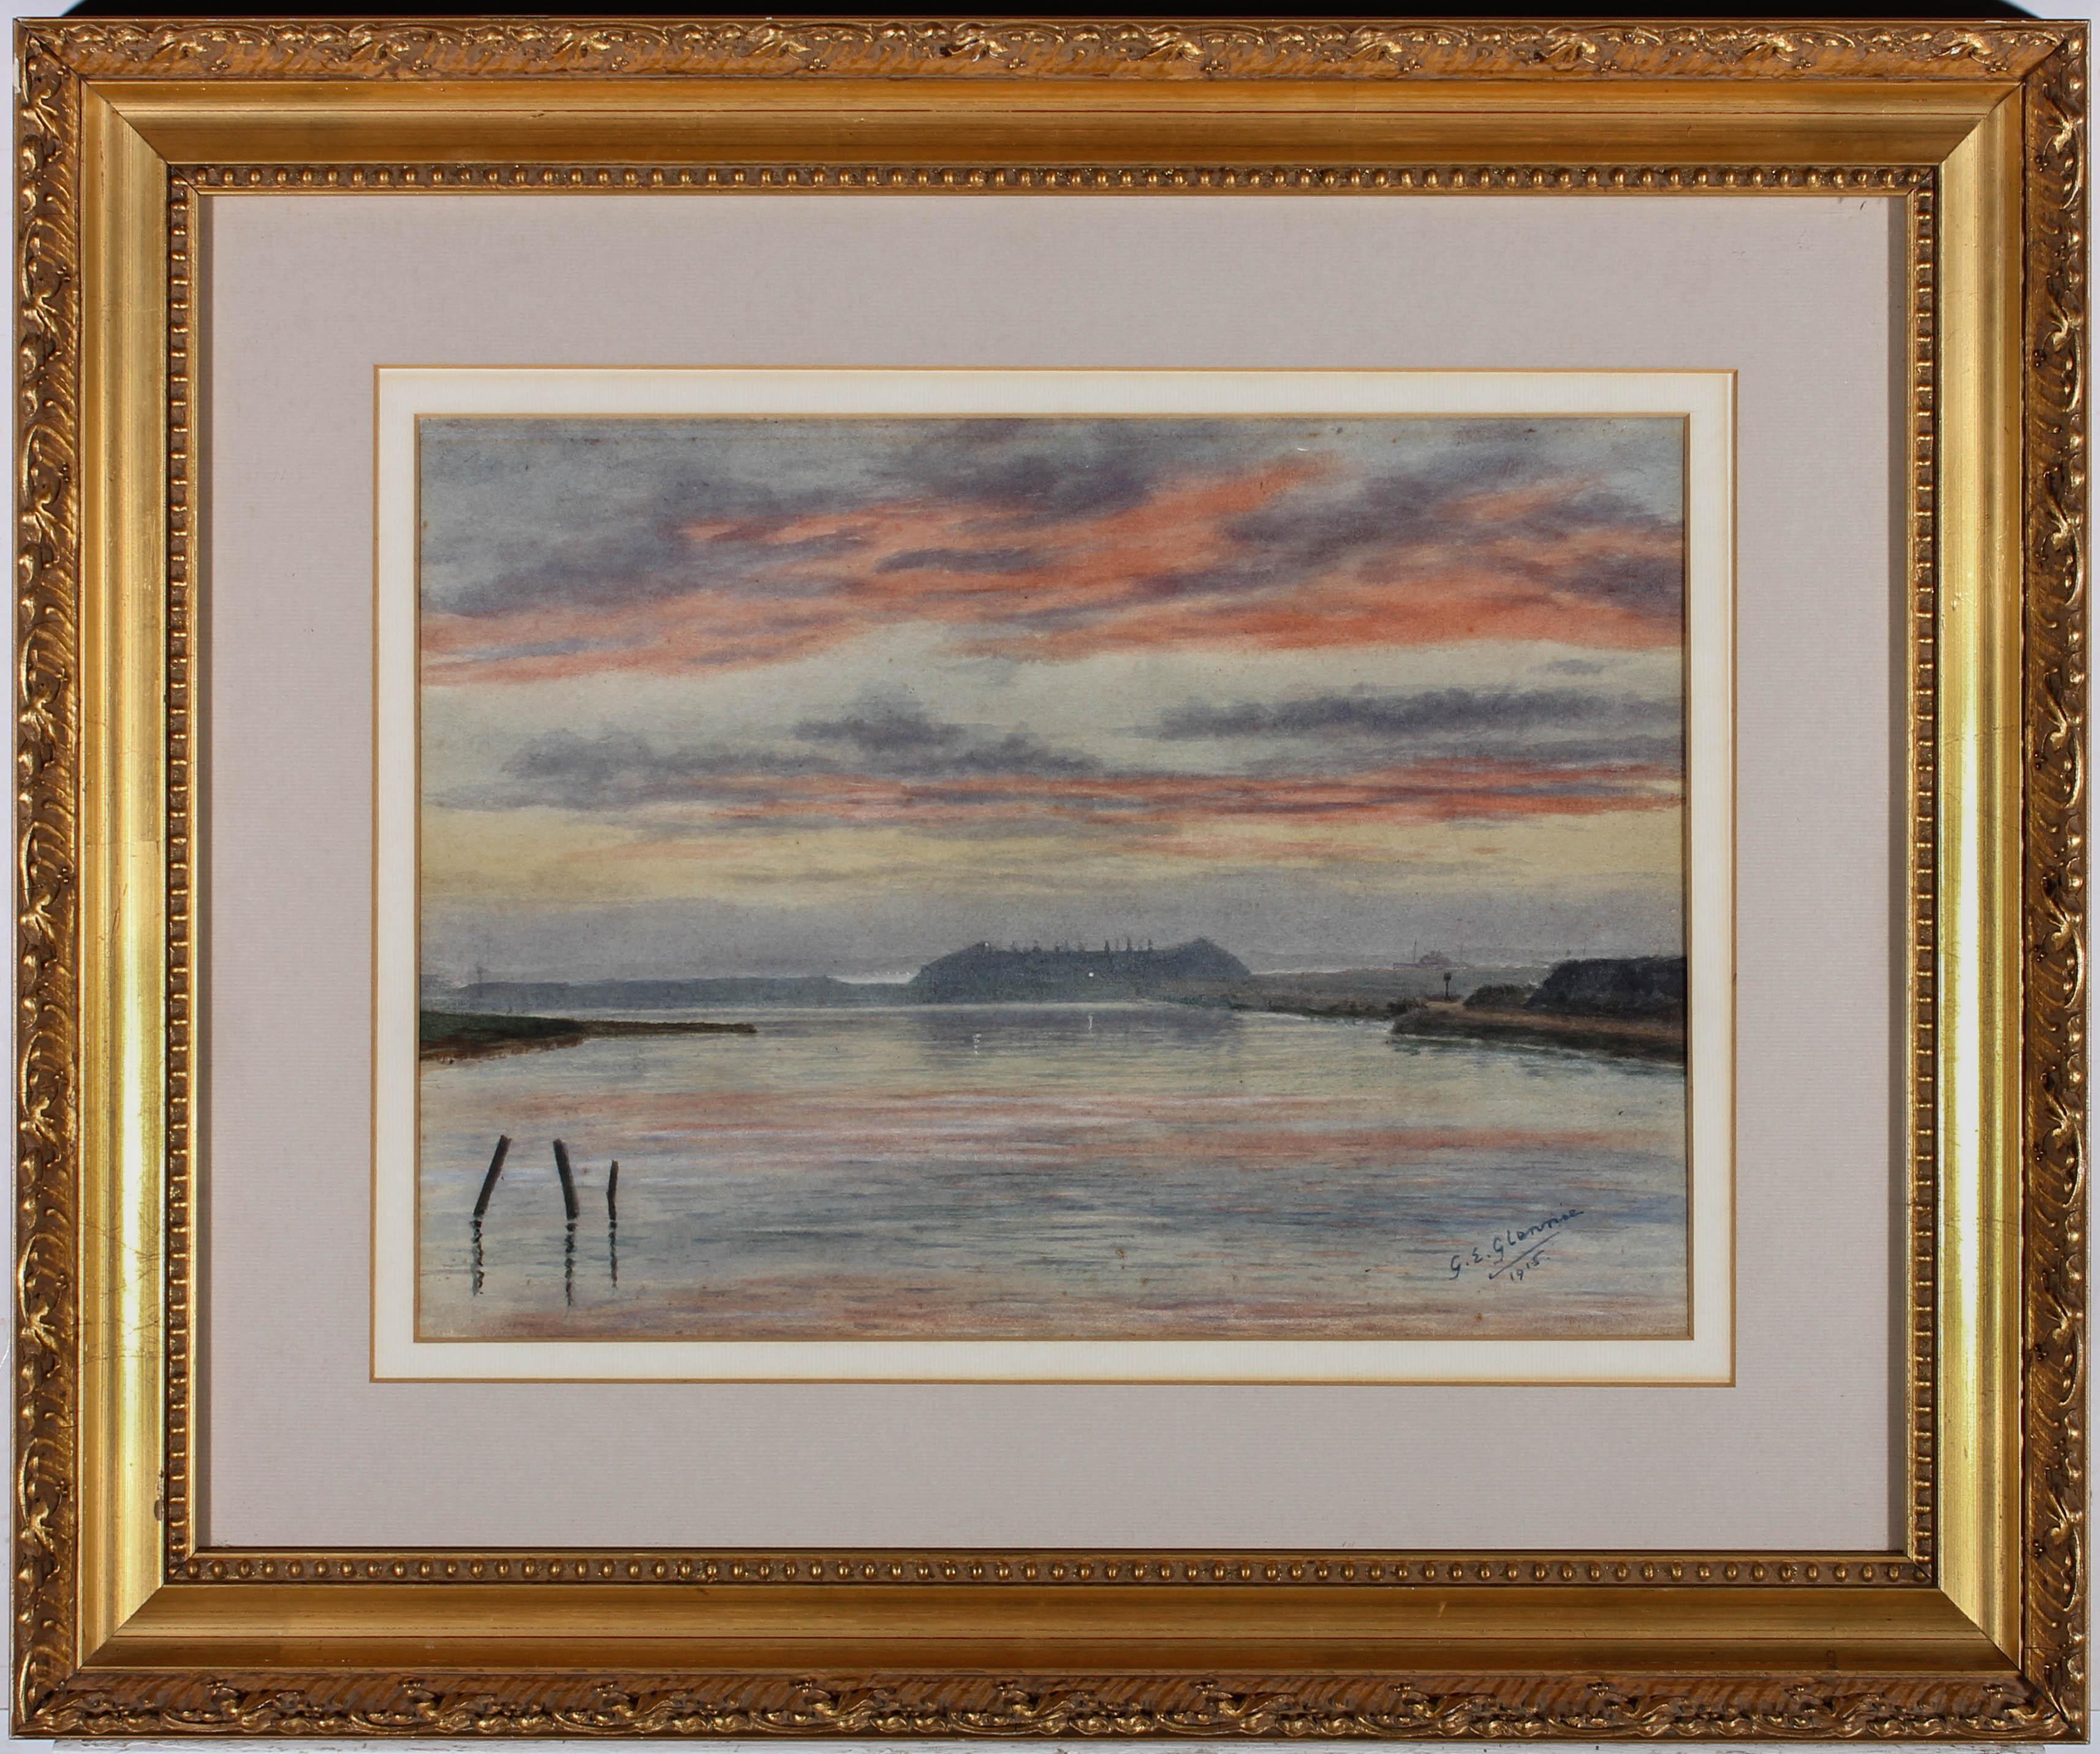 A misty harbour seascape, with cooling hues of pink and purple in the sky and quiet waters. Signed and dated to the lower right-hand corner. Attractively presented in a gilt-effect frame and double card mount. Glazed. On paper.

